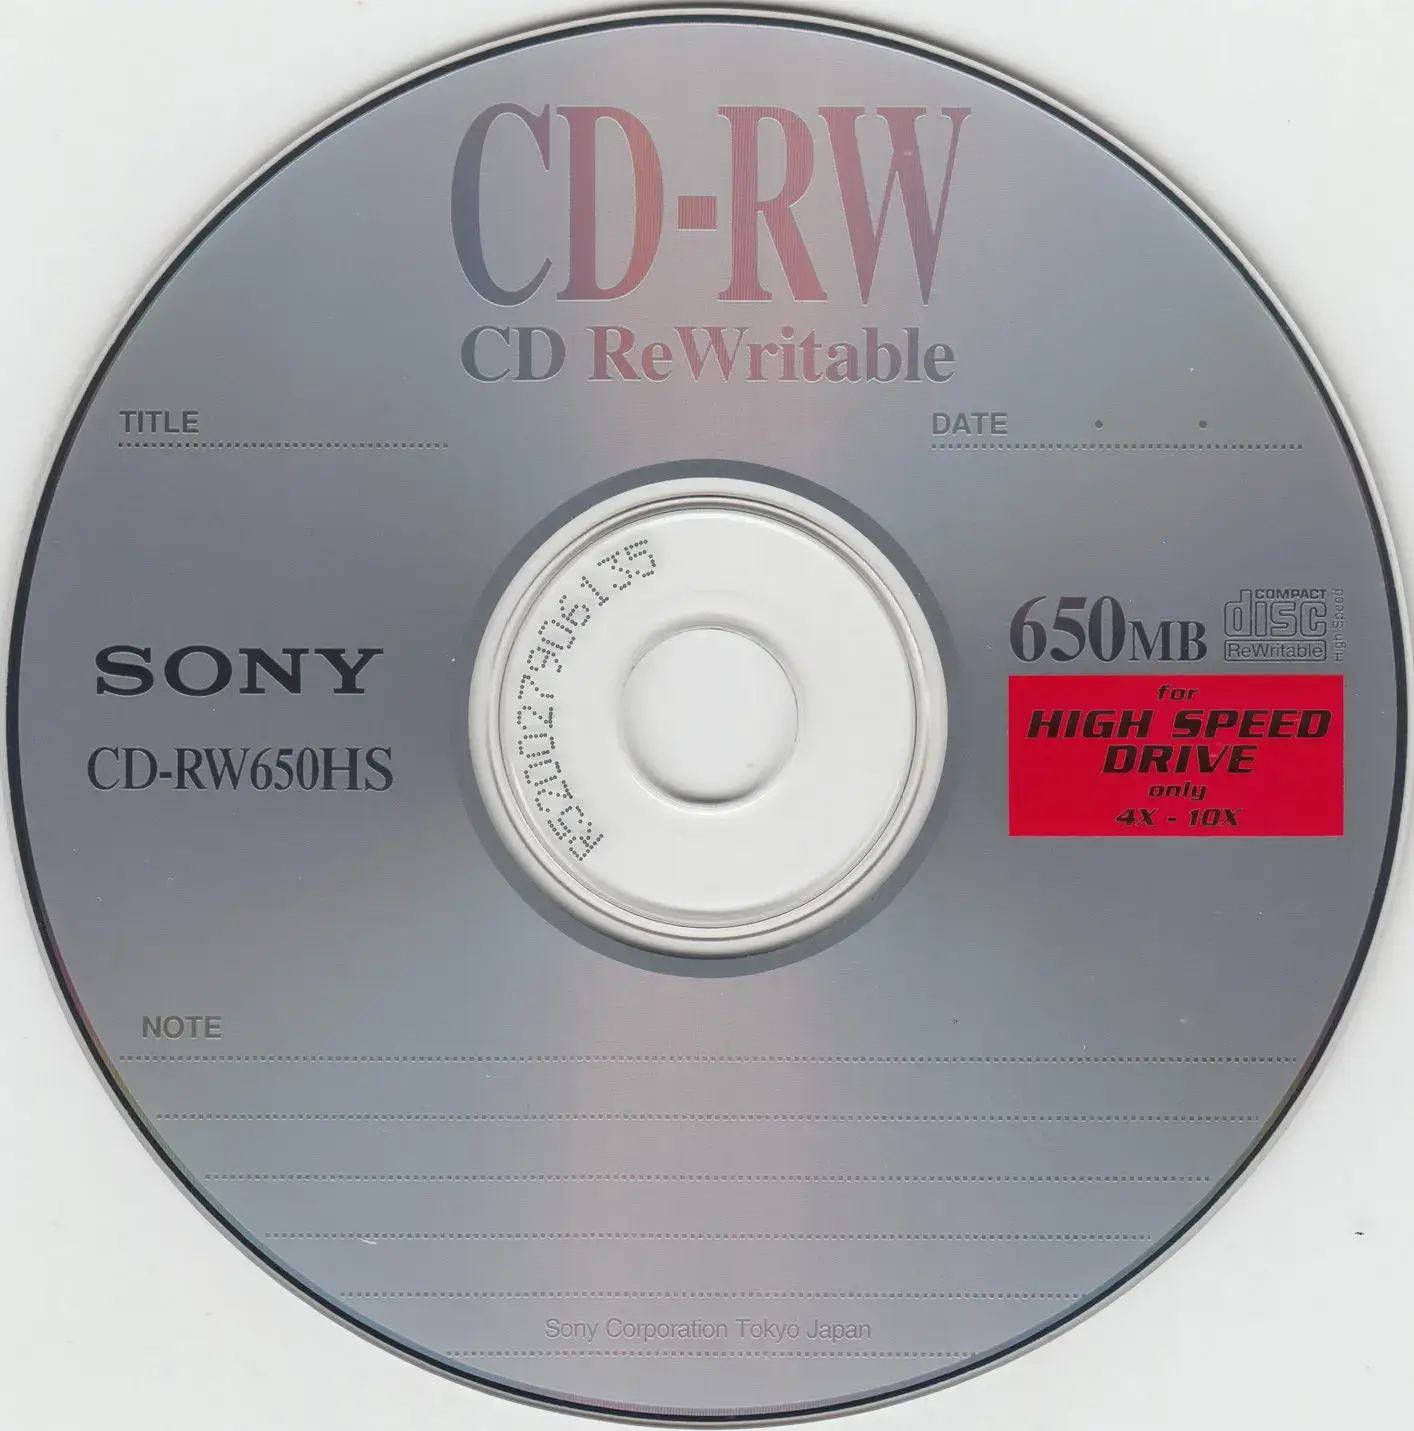 a picture of snoy cd rw